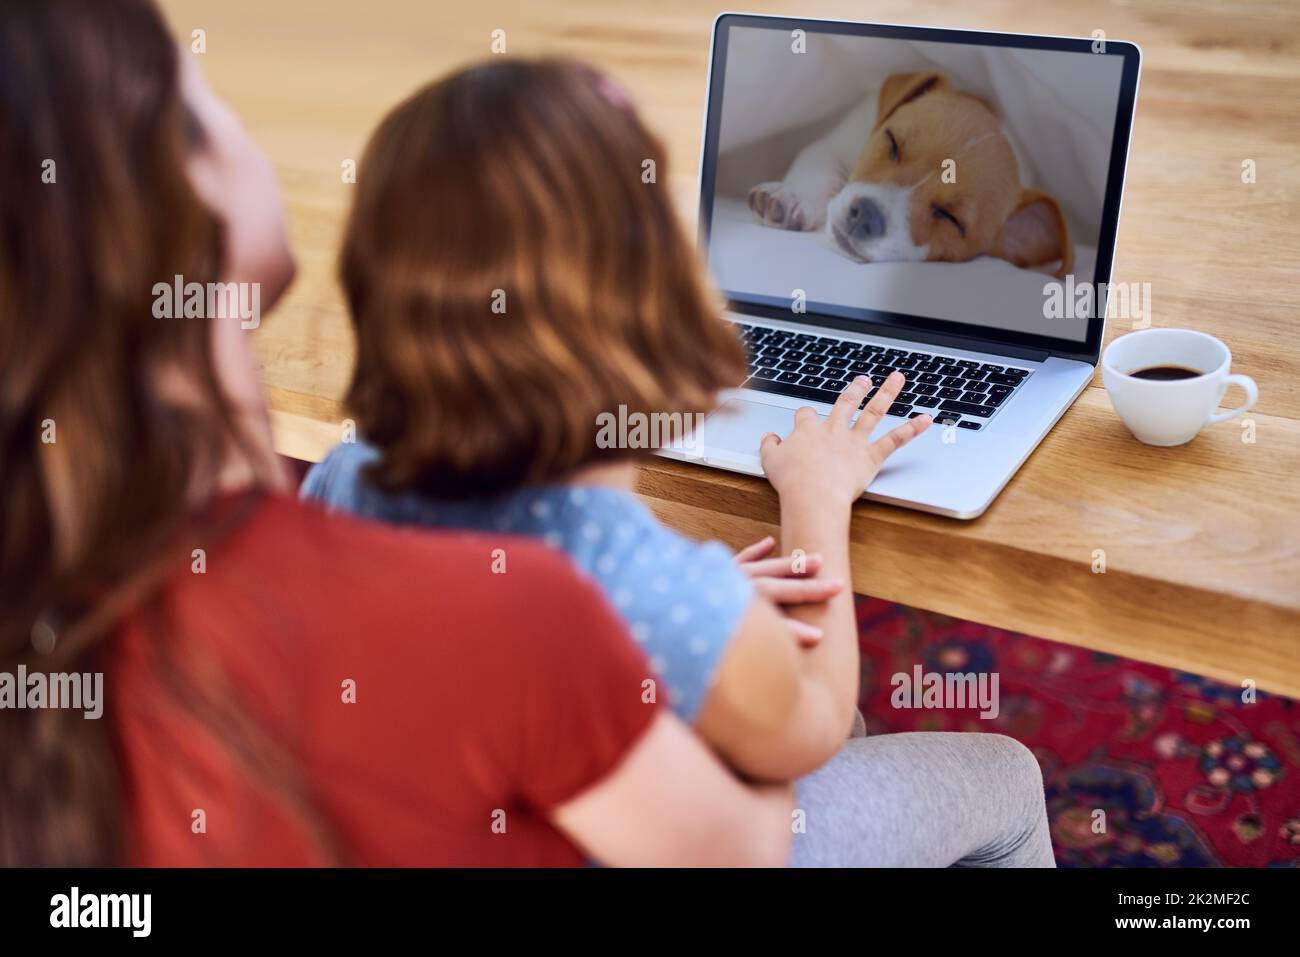 Look at the cute puppy Mom. Cropped shot of a mother and daughter using a laptop together at home. Stock Photo